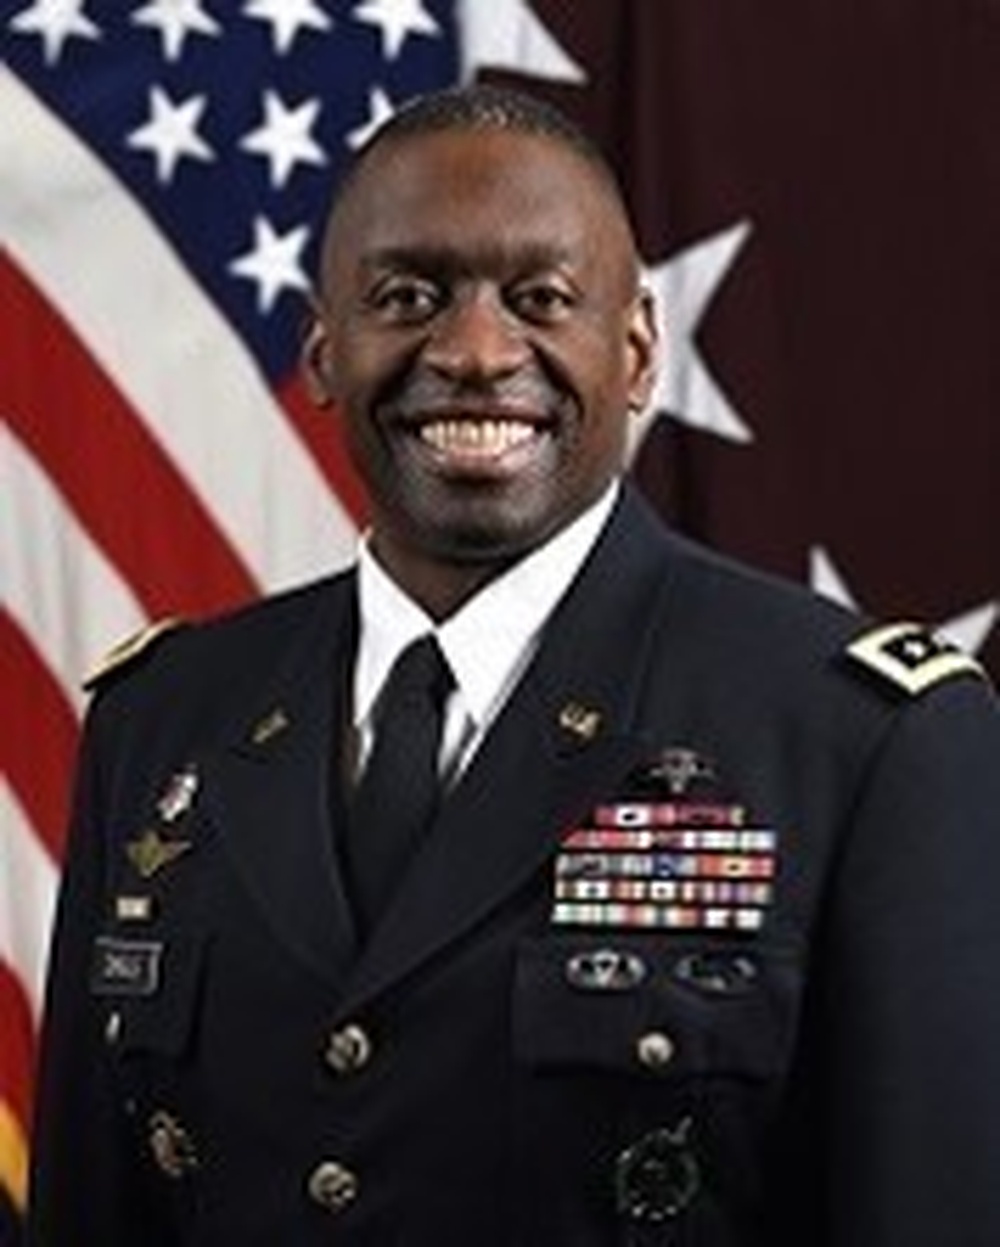 DVIDS News Army Surgeon General joins military medical leaders to